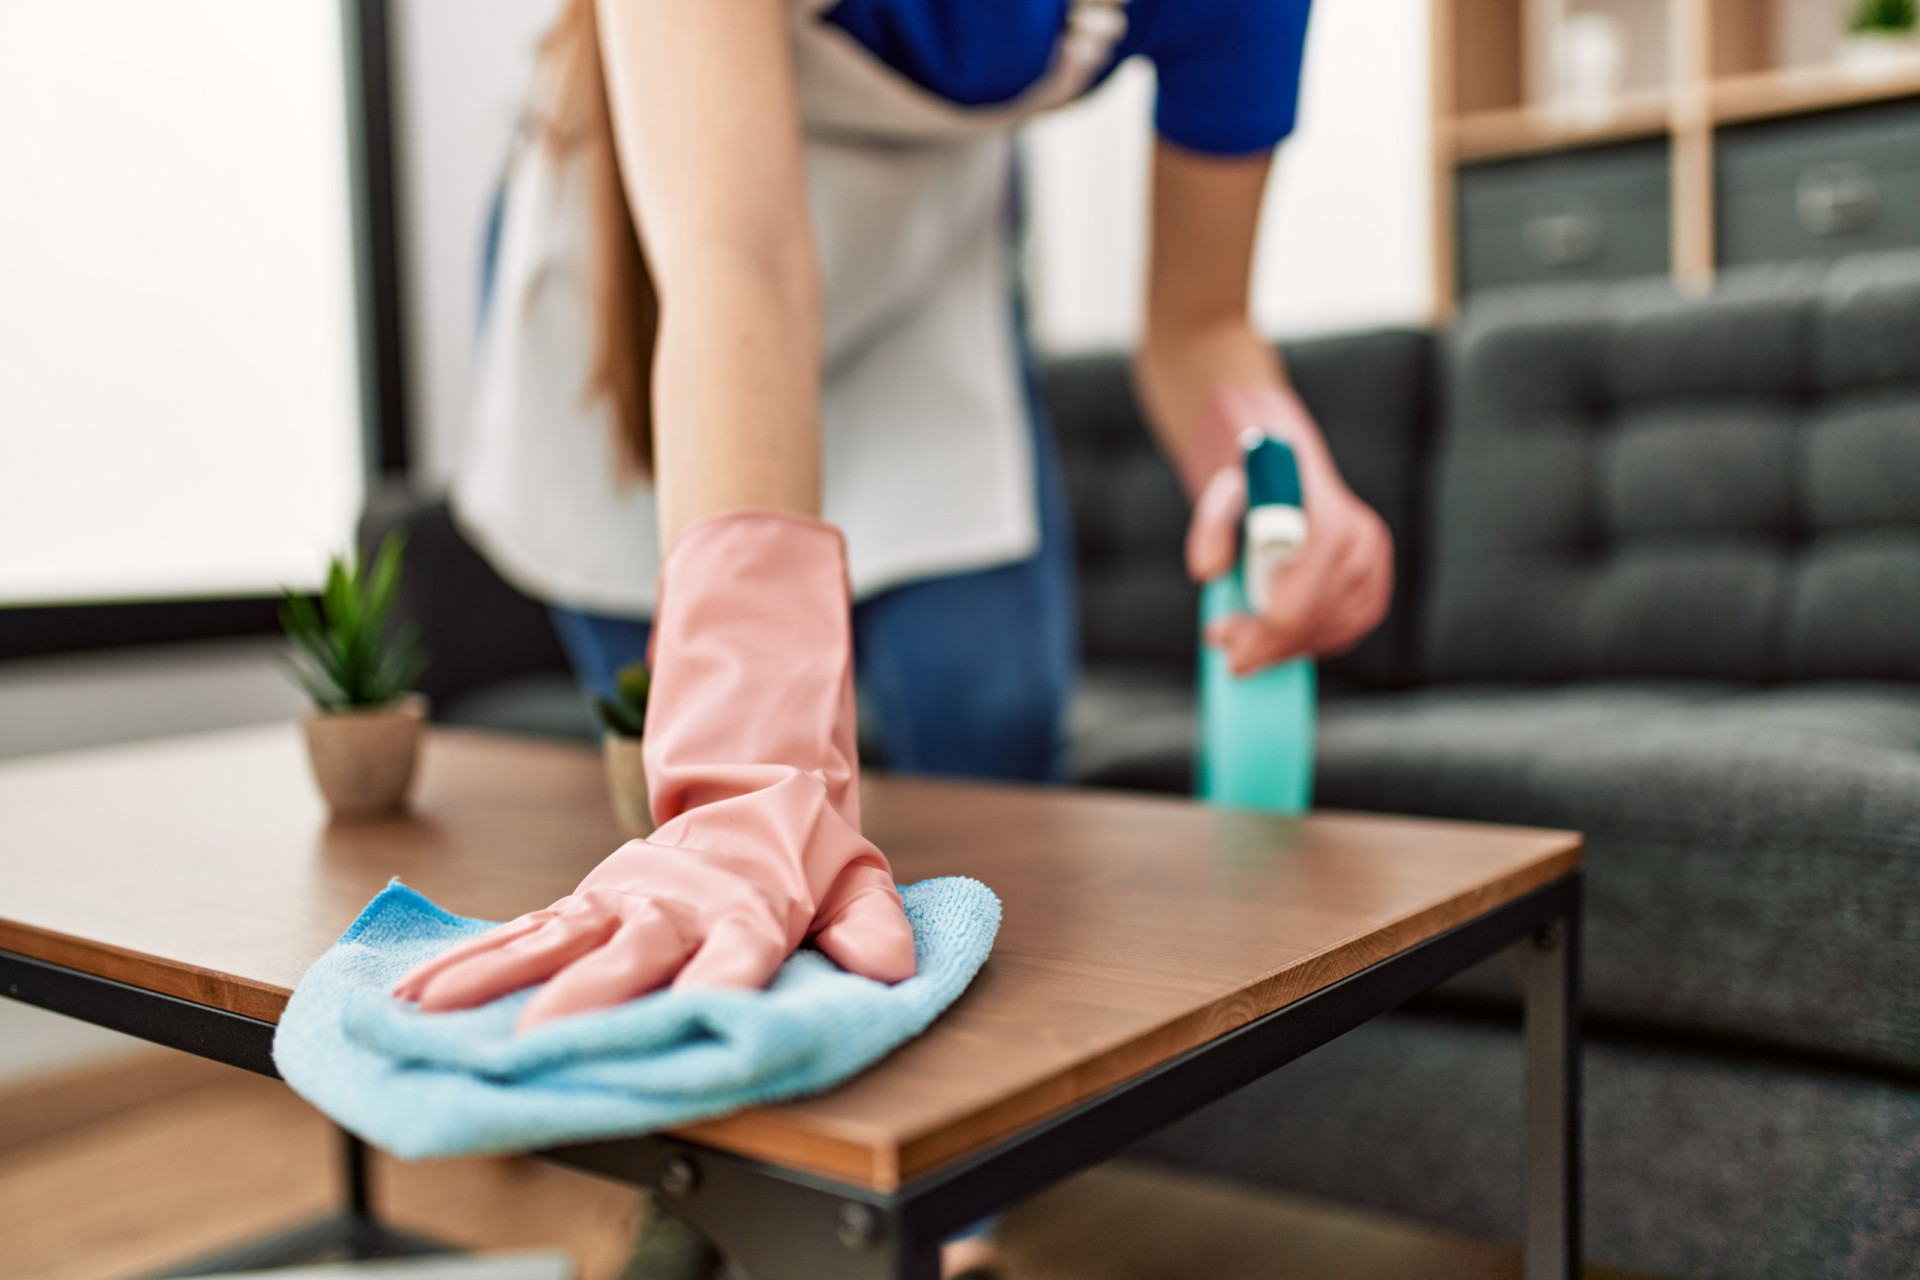 <p>If you want to work during hours when no one else does, you can focus your cleaning business on office clients. You can also focus on cleaning retail businesses or homes.</p><p>You may also like:<a href="https://www.starsinsider.com/n/293006?utm_source=msn.com&utm_medium=display&utm_campaign=referral_description&utm_content=670061en-en"> Get to know Europe's sunniest destination</a></p>